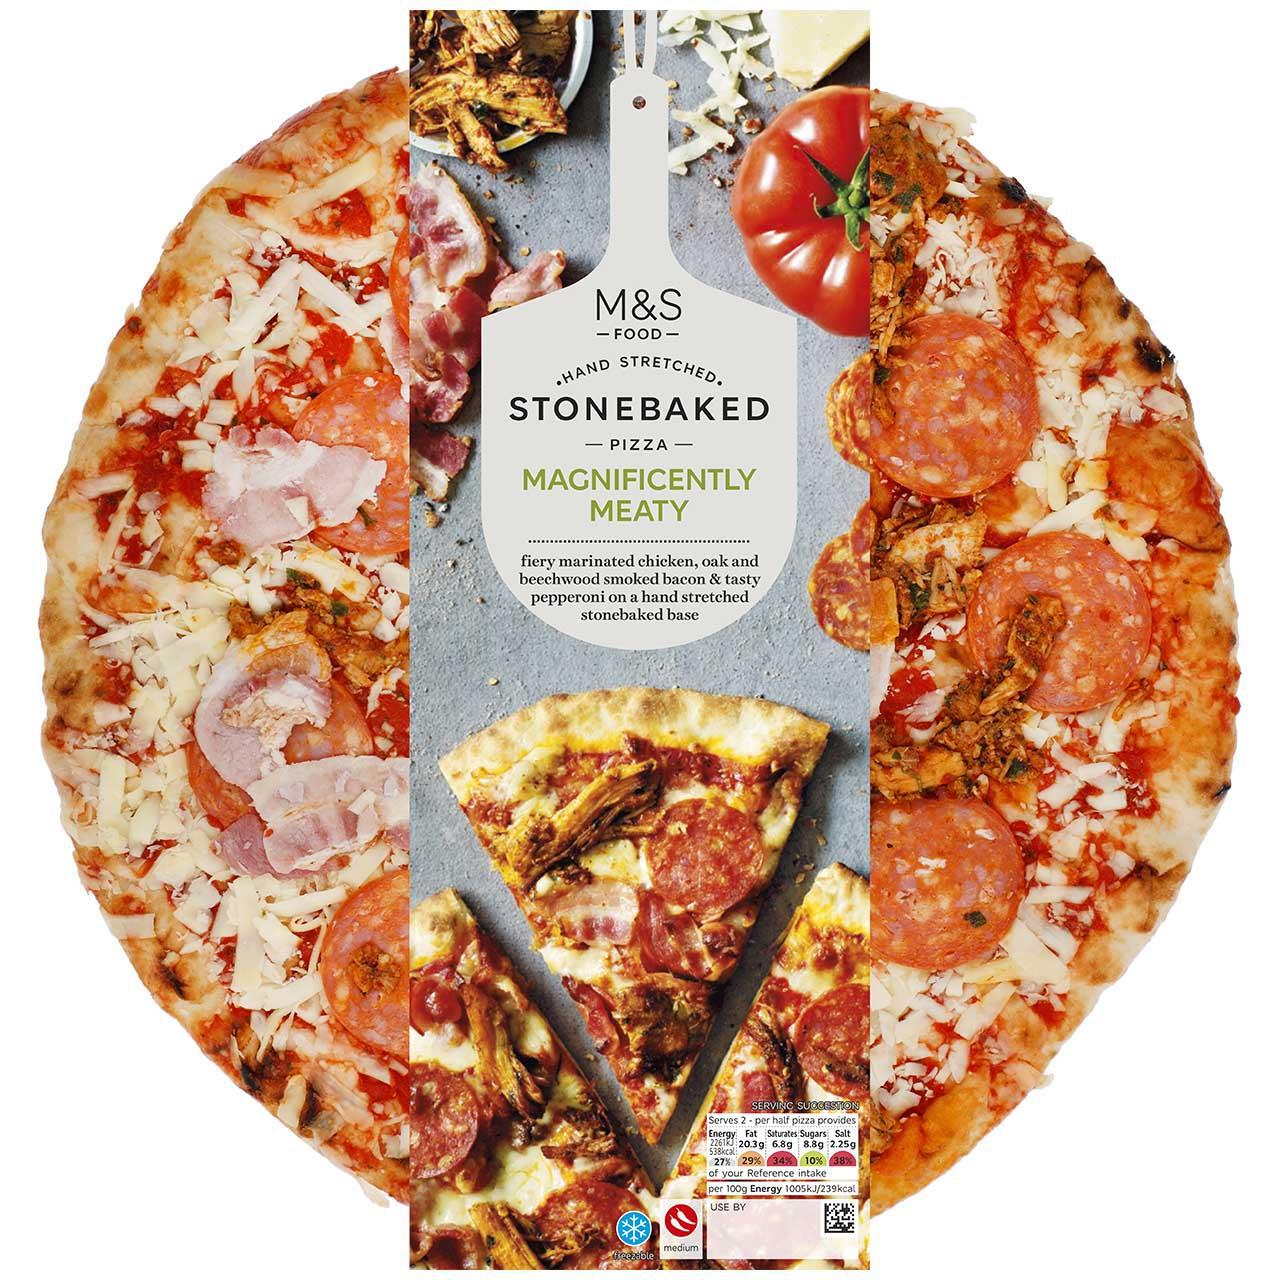 M&S Hand Stretched Stone Baked Magnificently Meaty Pizza 450g